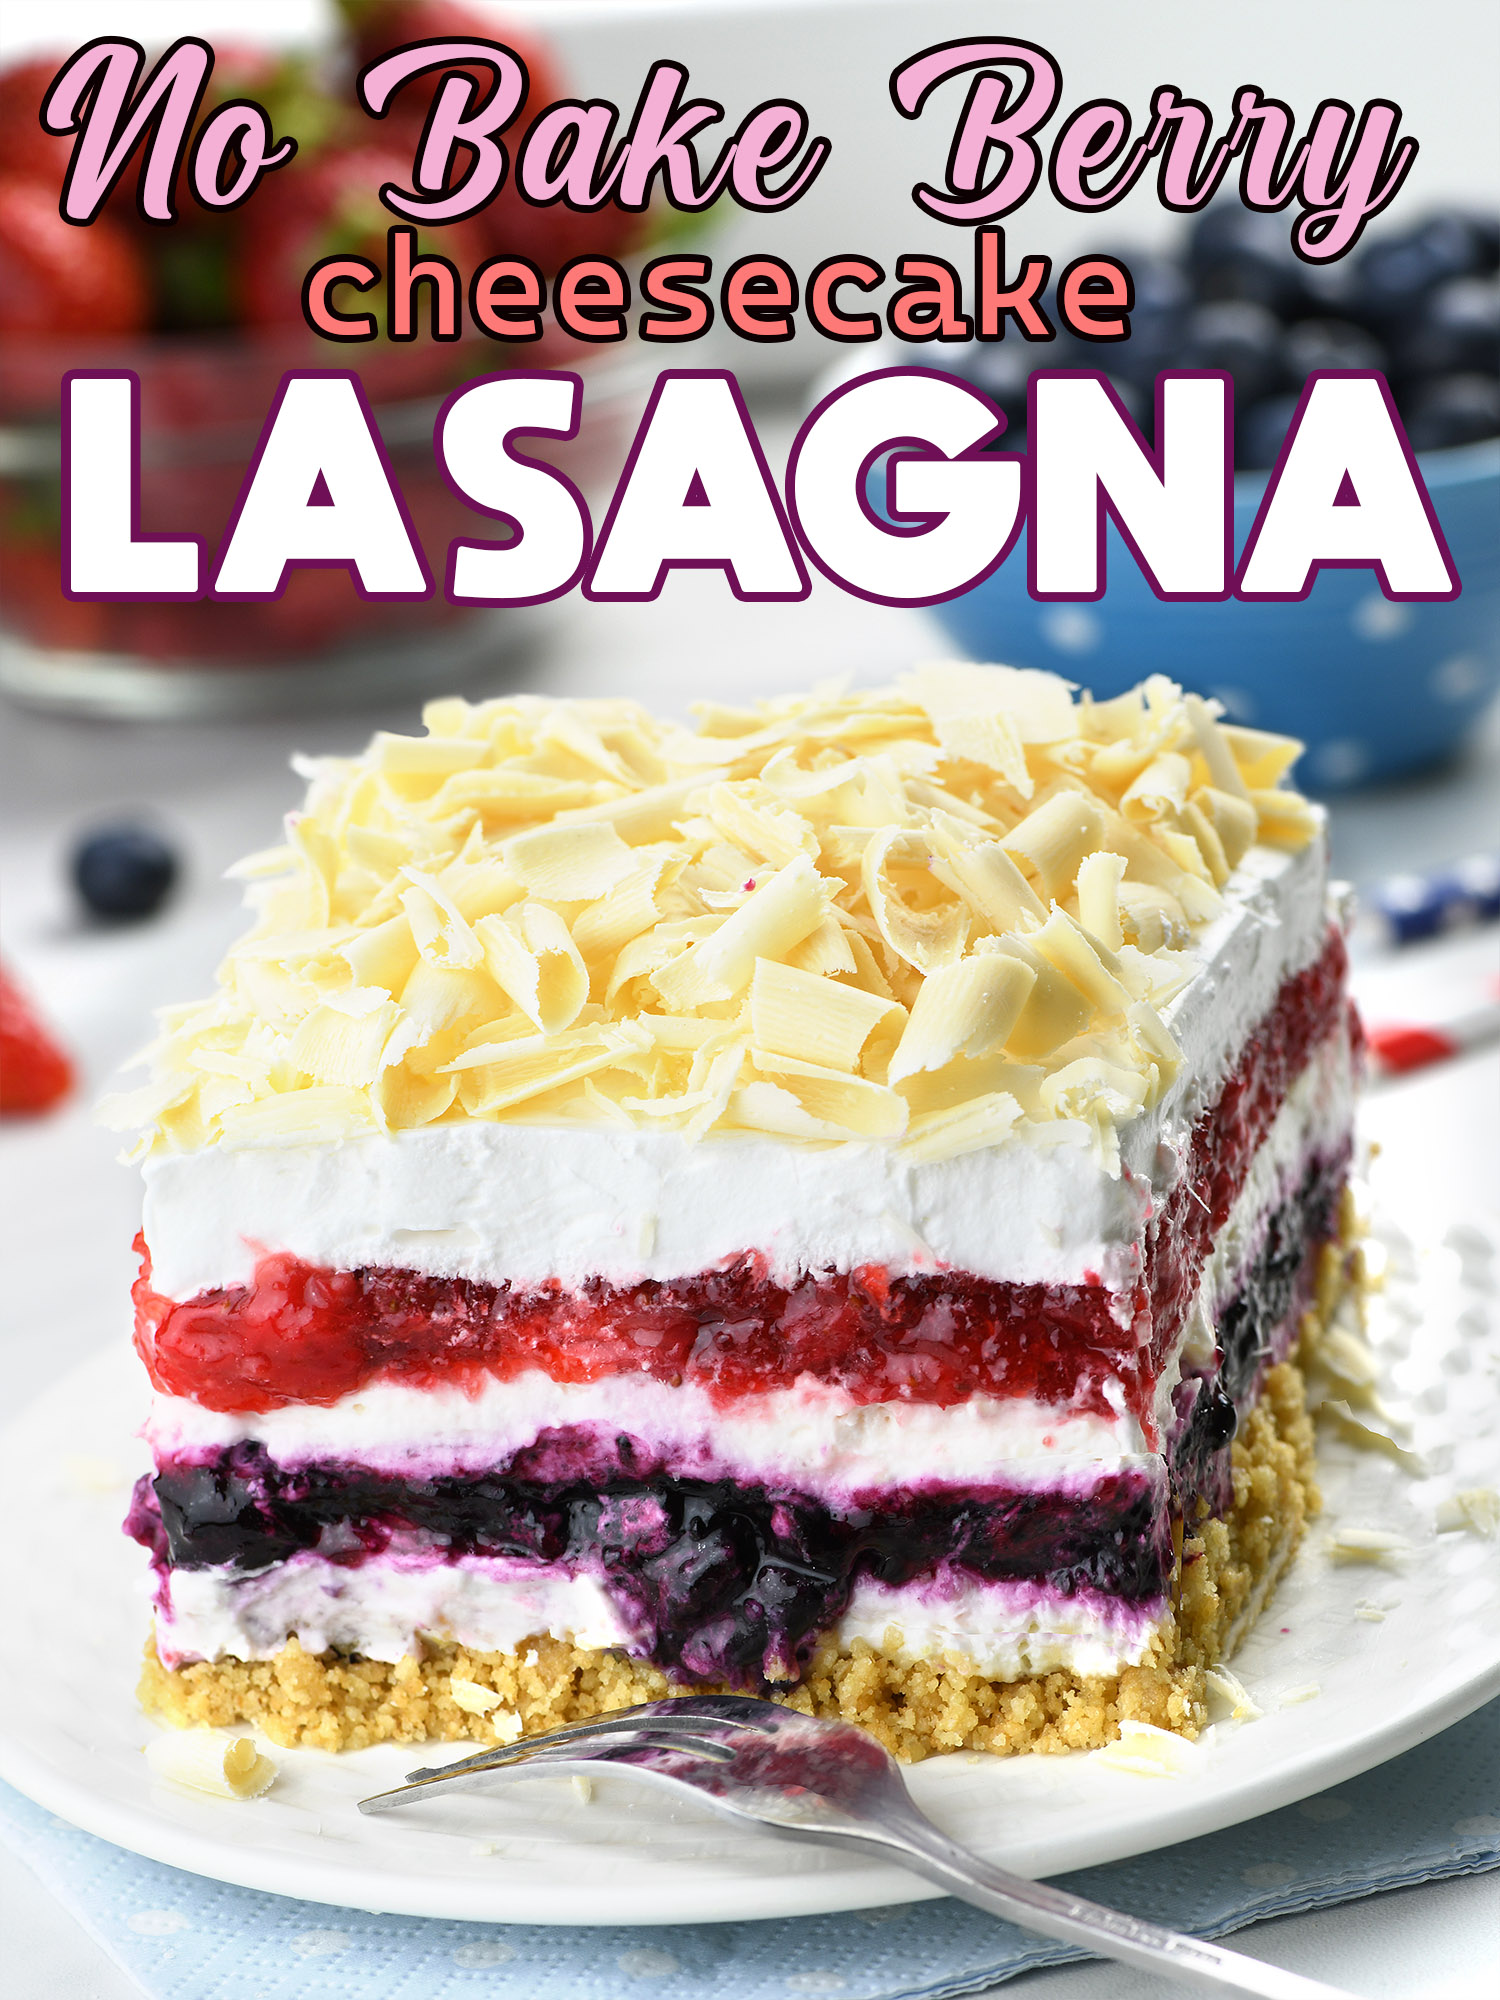 Delicious layered dessert featuring a no-bake berry cheesecake lasagna. The dessert has a crumbly base, layers of white cream, and vibrant red and purple berry layers, topped with white chocolate shavings.